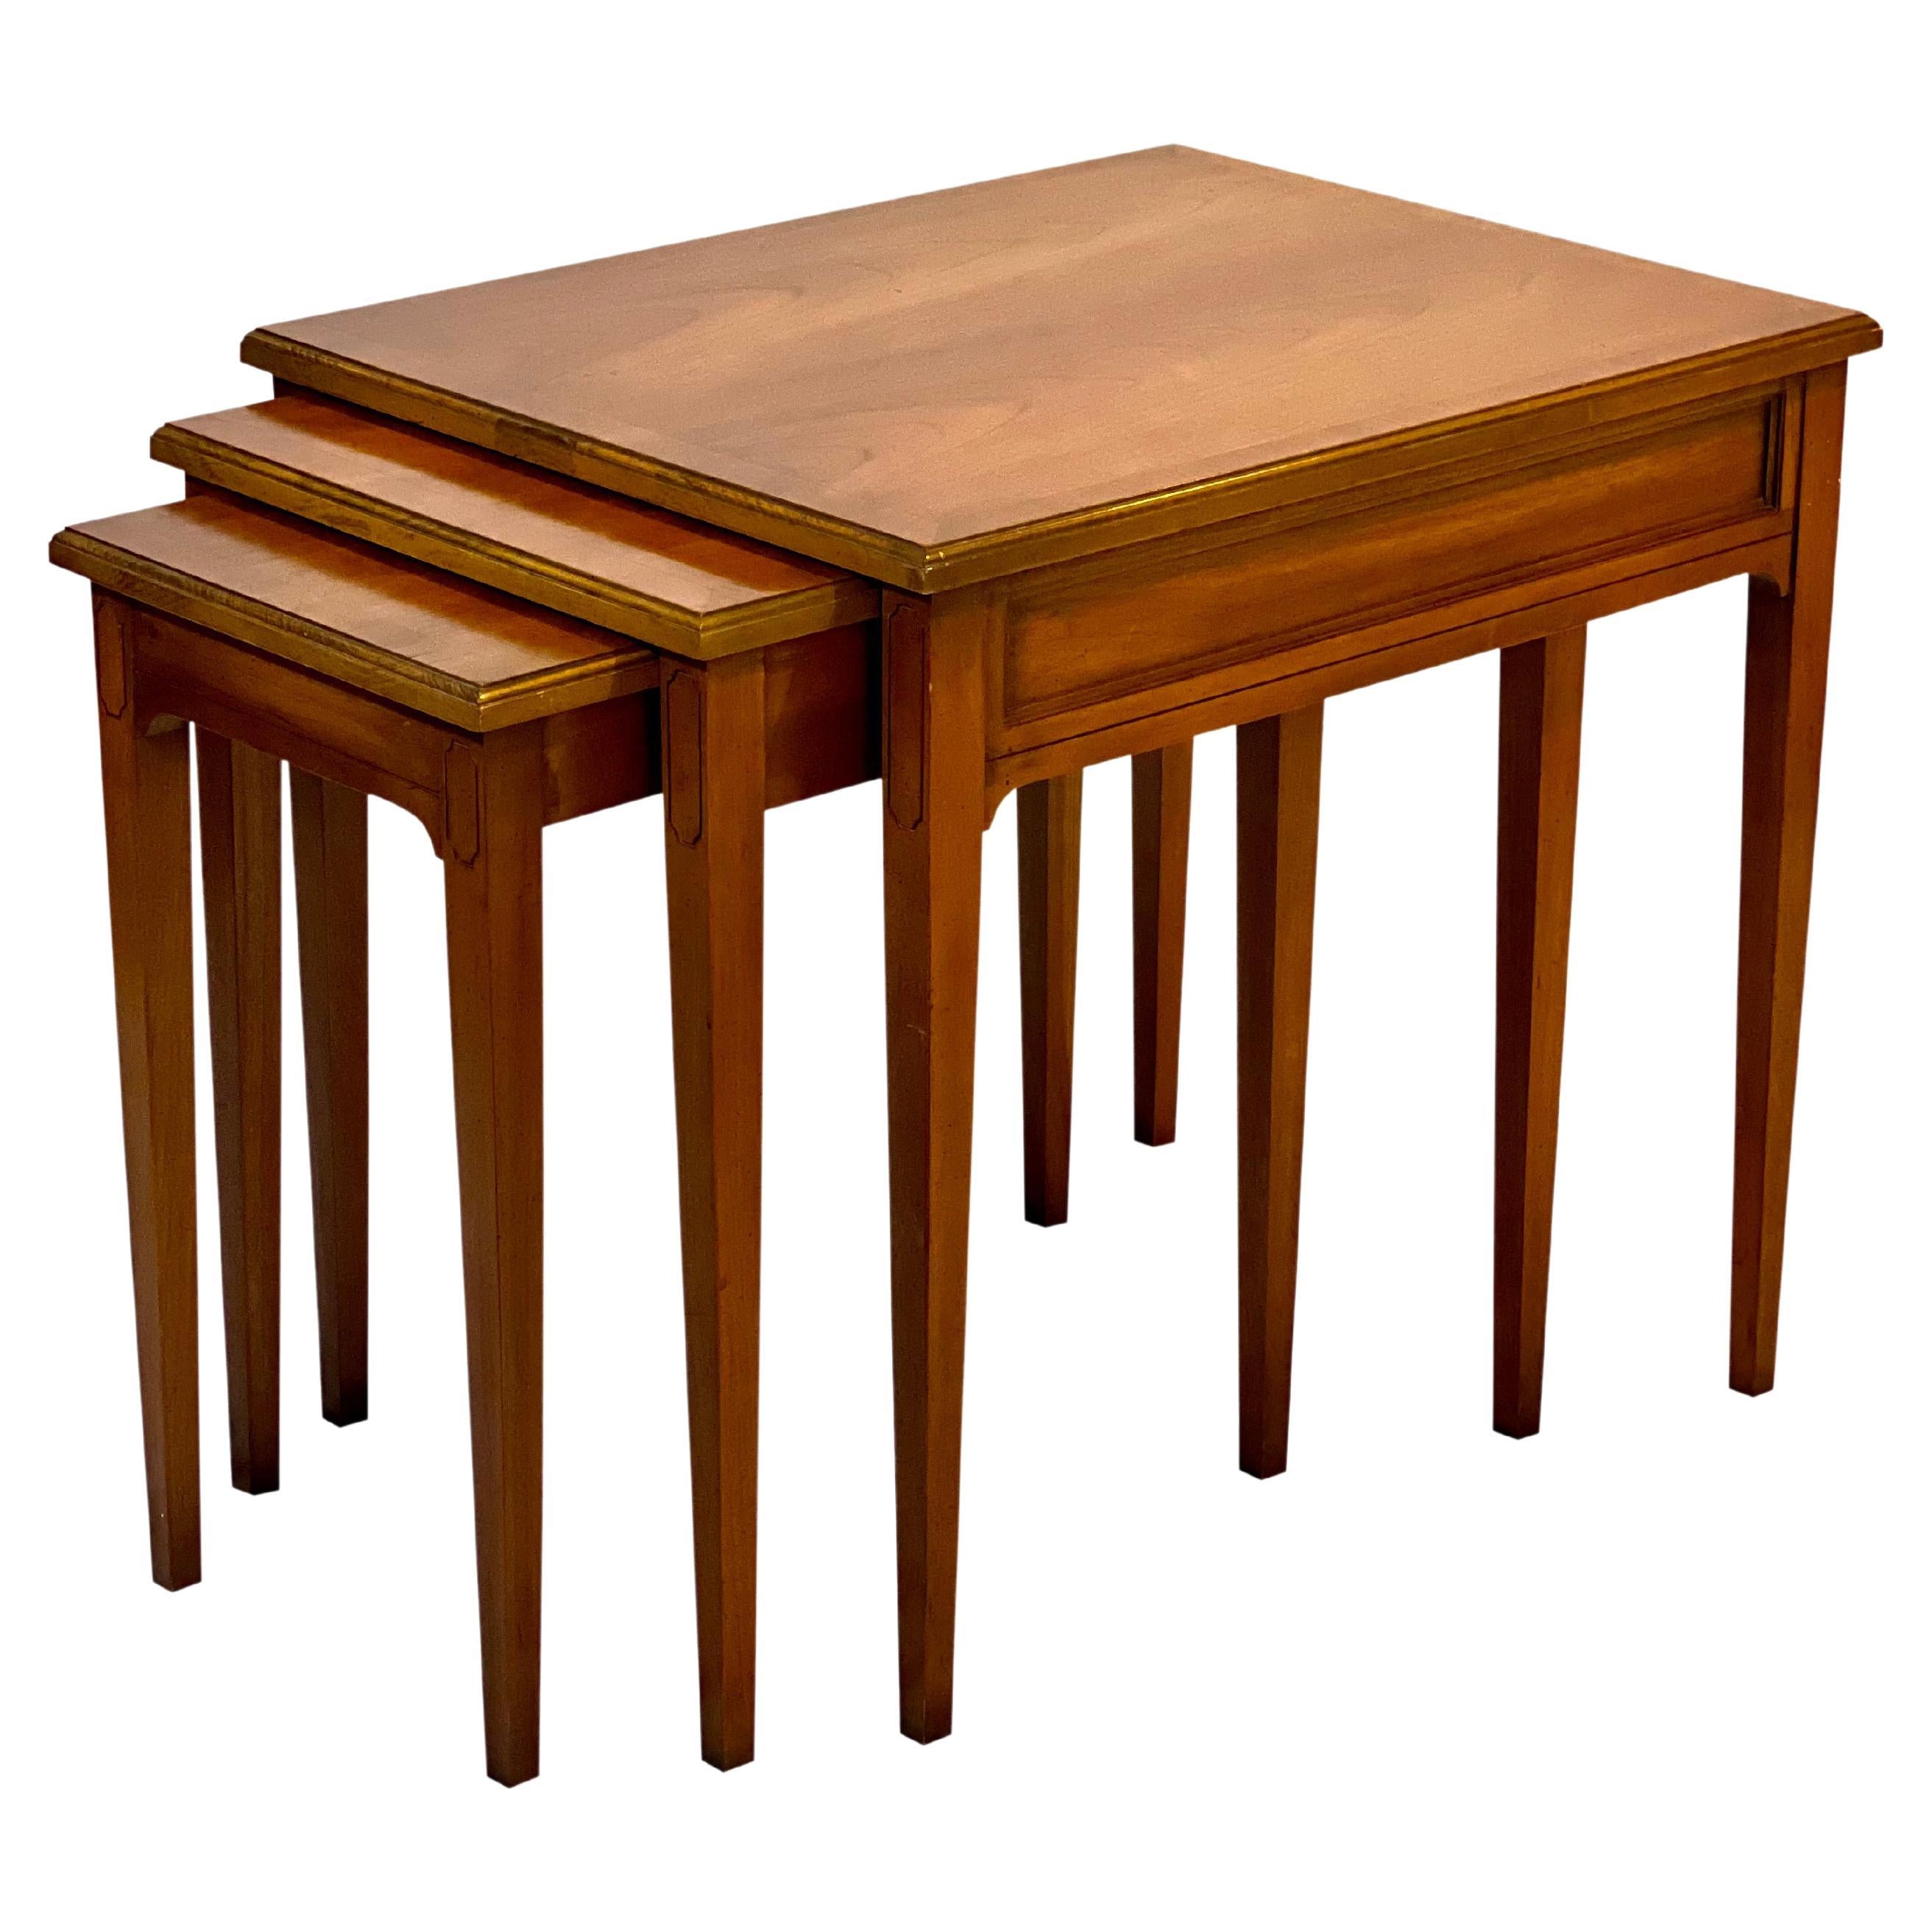 Heritage Furniture Nesting Tables and Stacking Tables